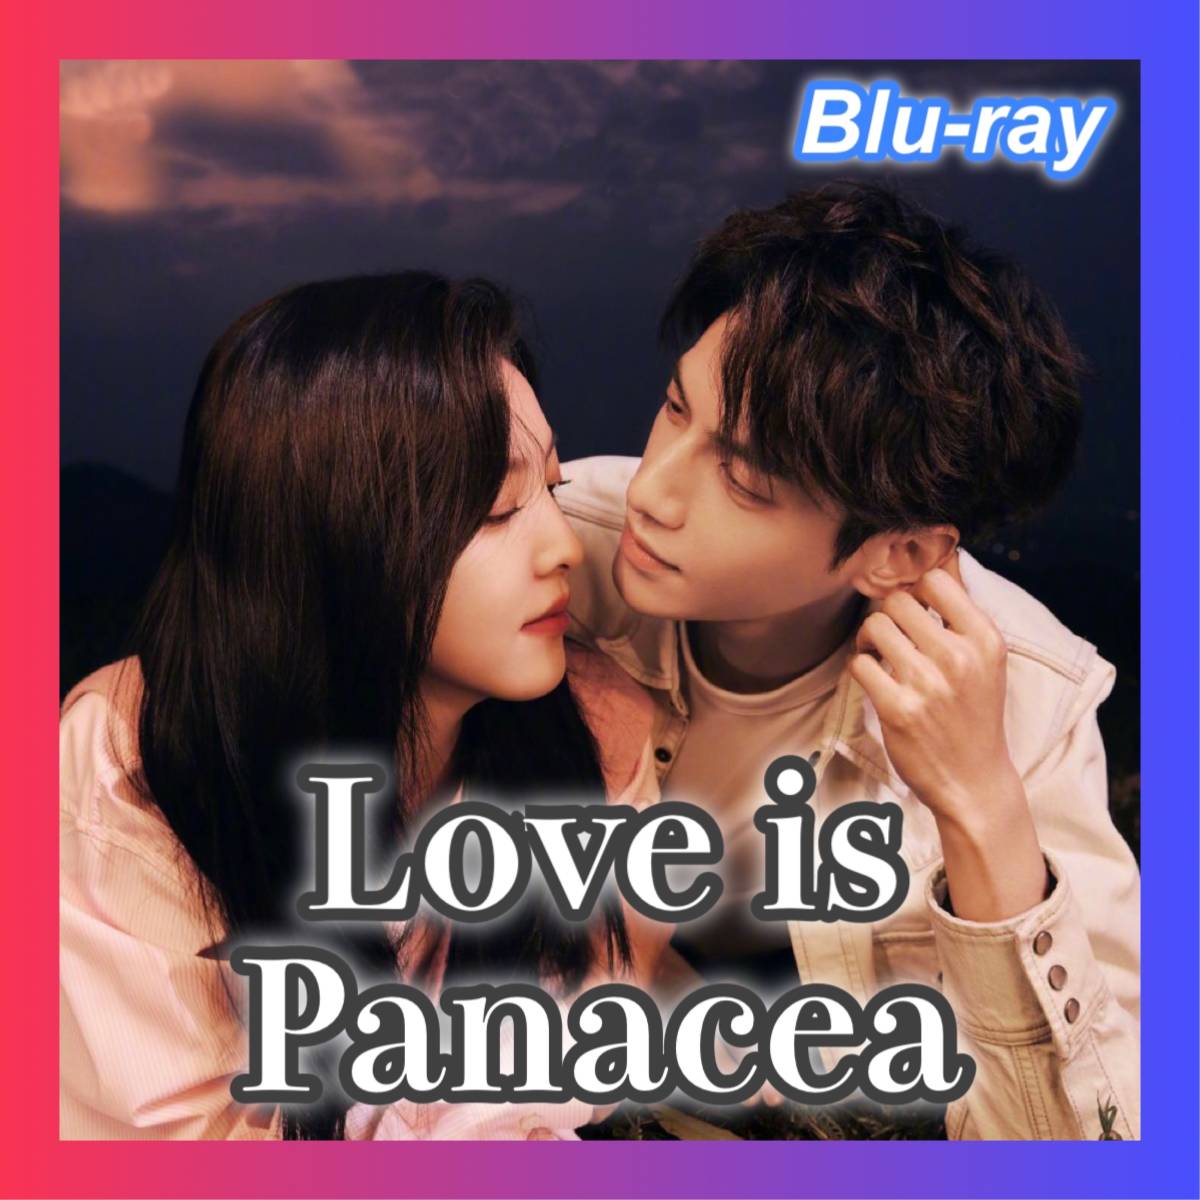 Love is Panacea（自動翻訳）』^move^: ^『中国ドラマ』^ and ^「Blu-ray」^. ^Secure^ for■/_画像3